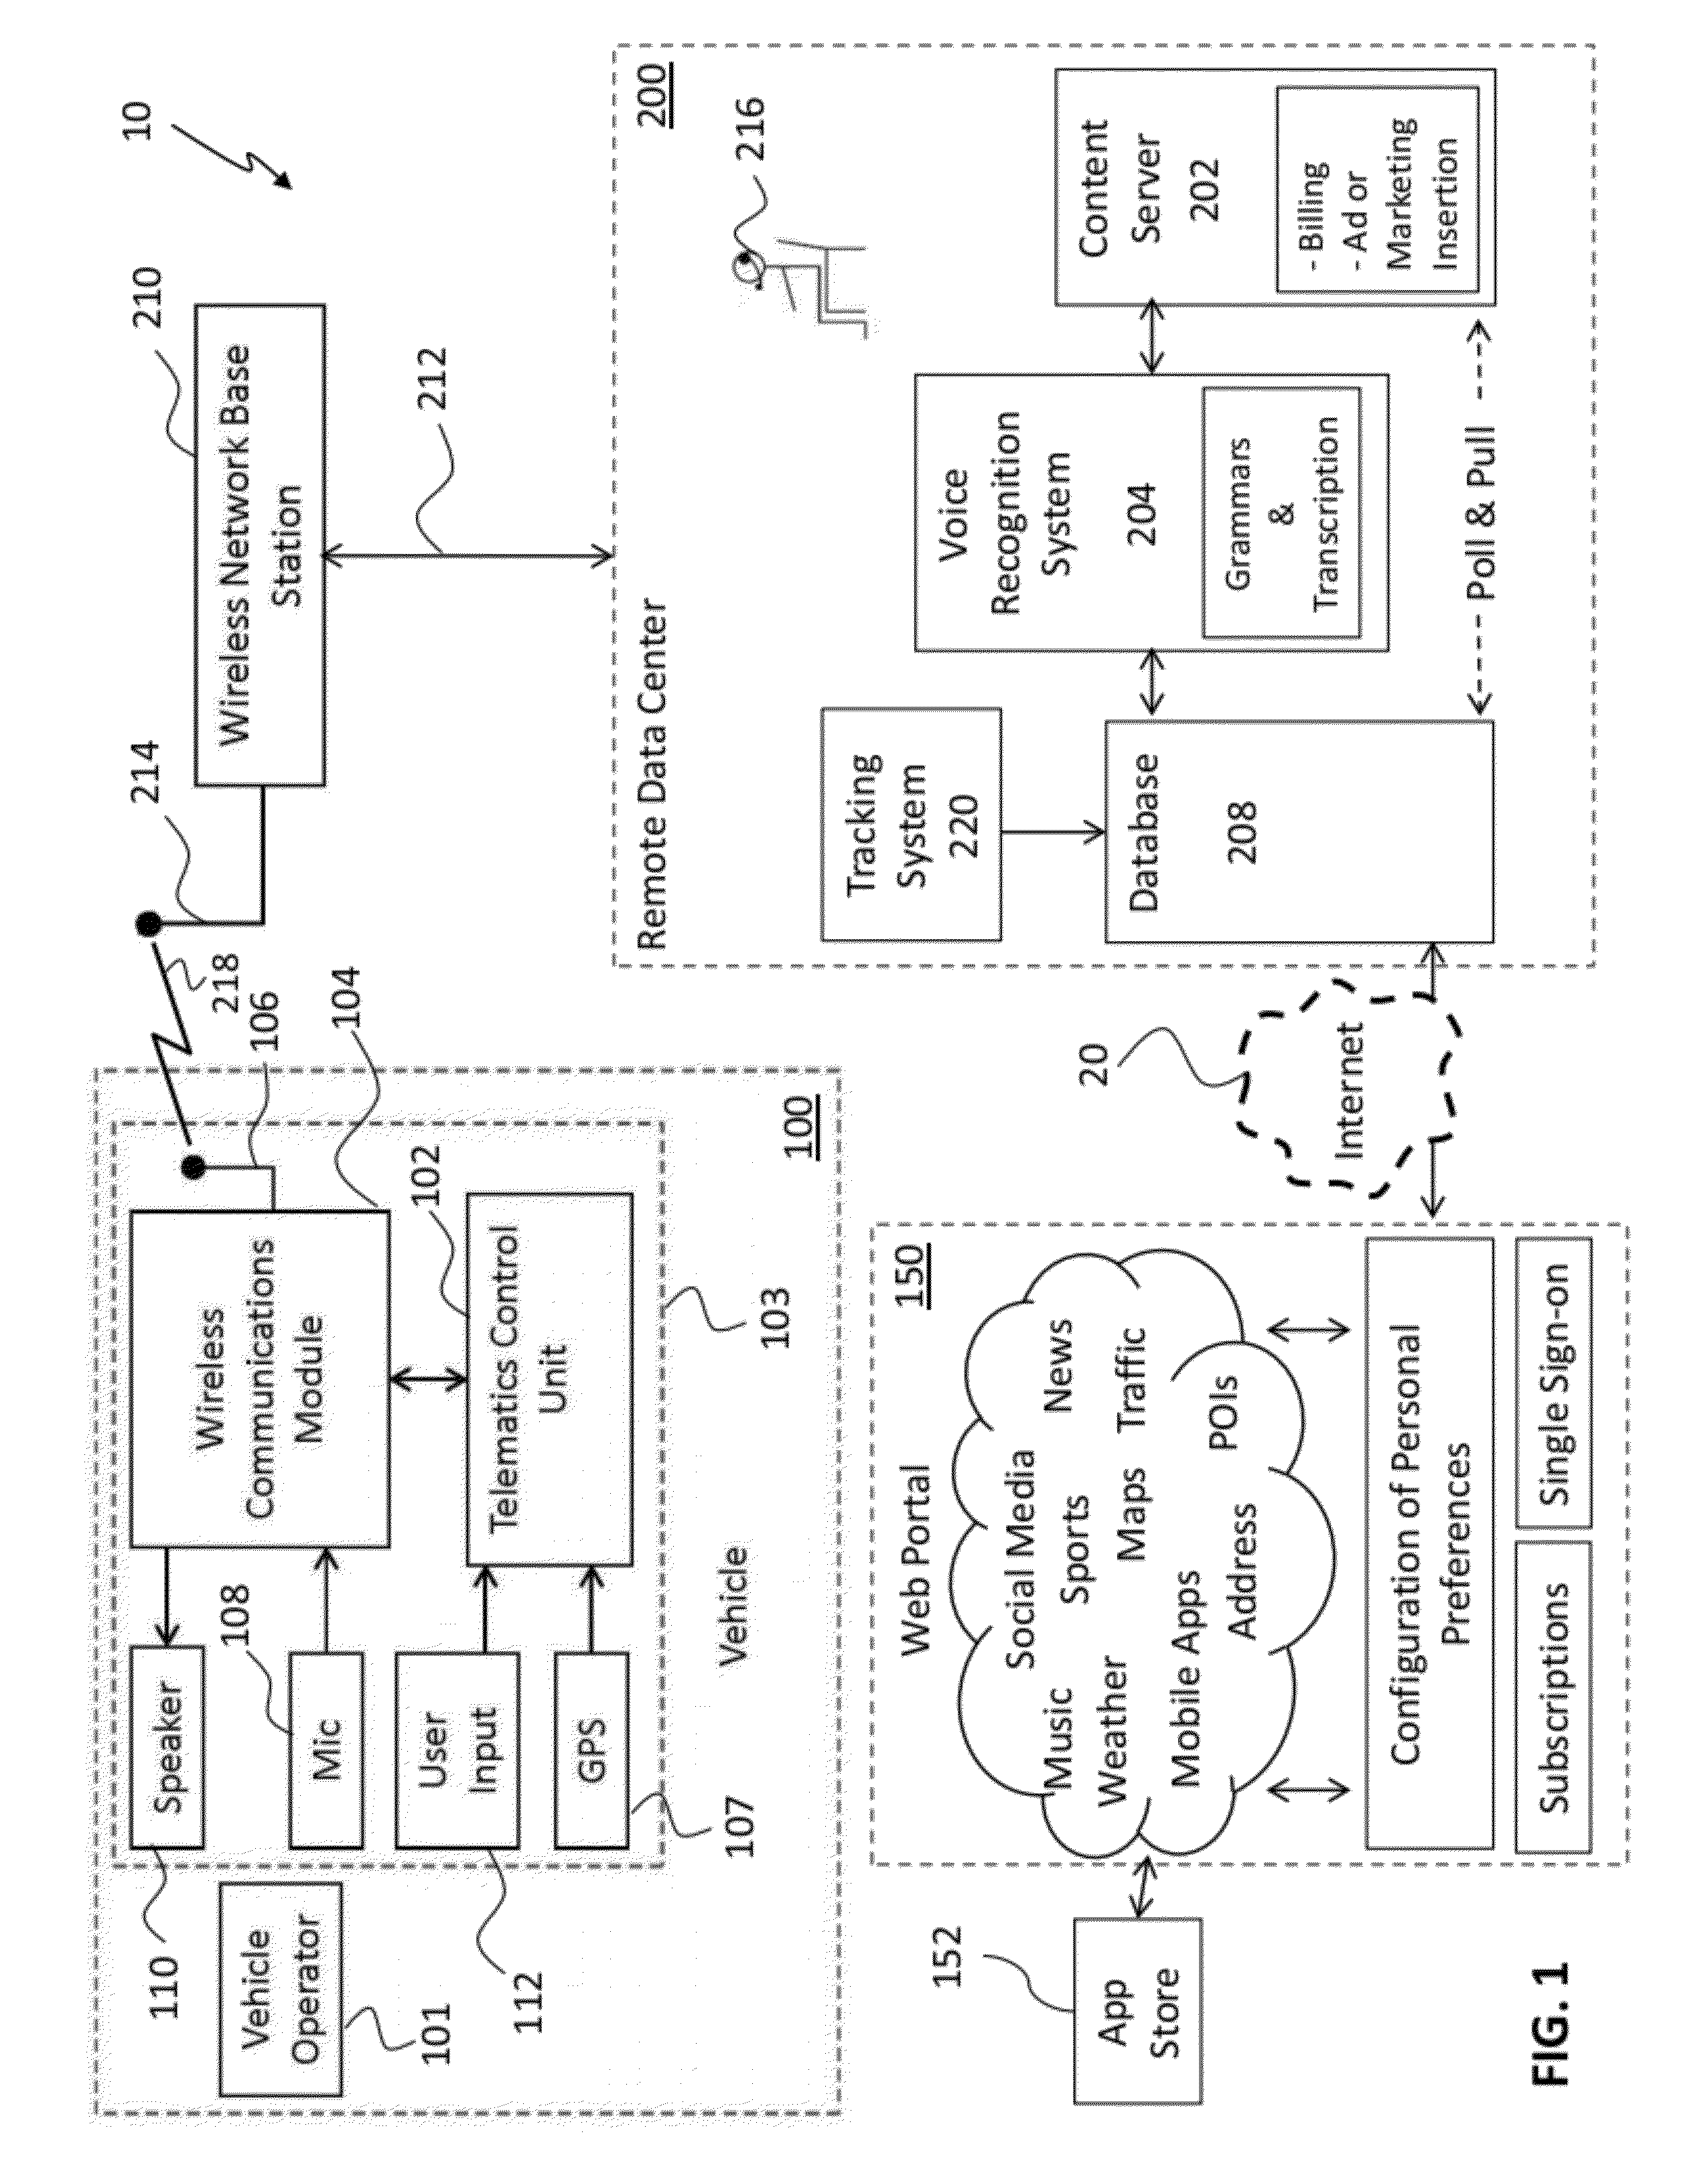 Systems and Methods for Delivering Content to Vehicles